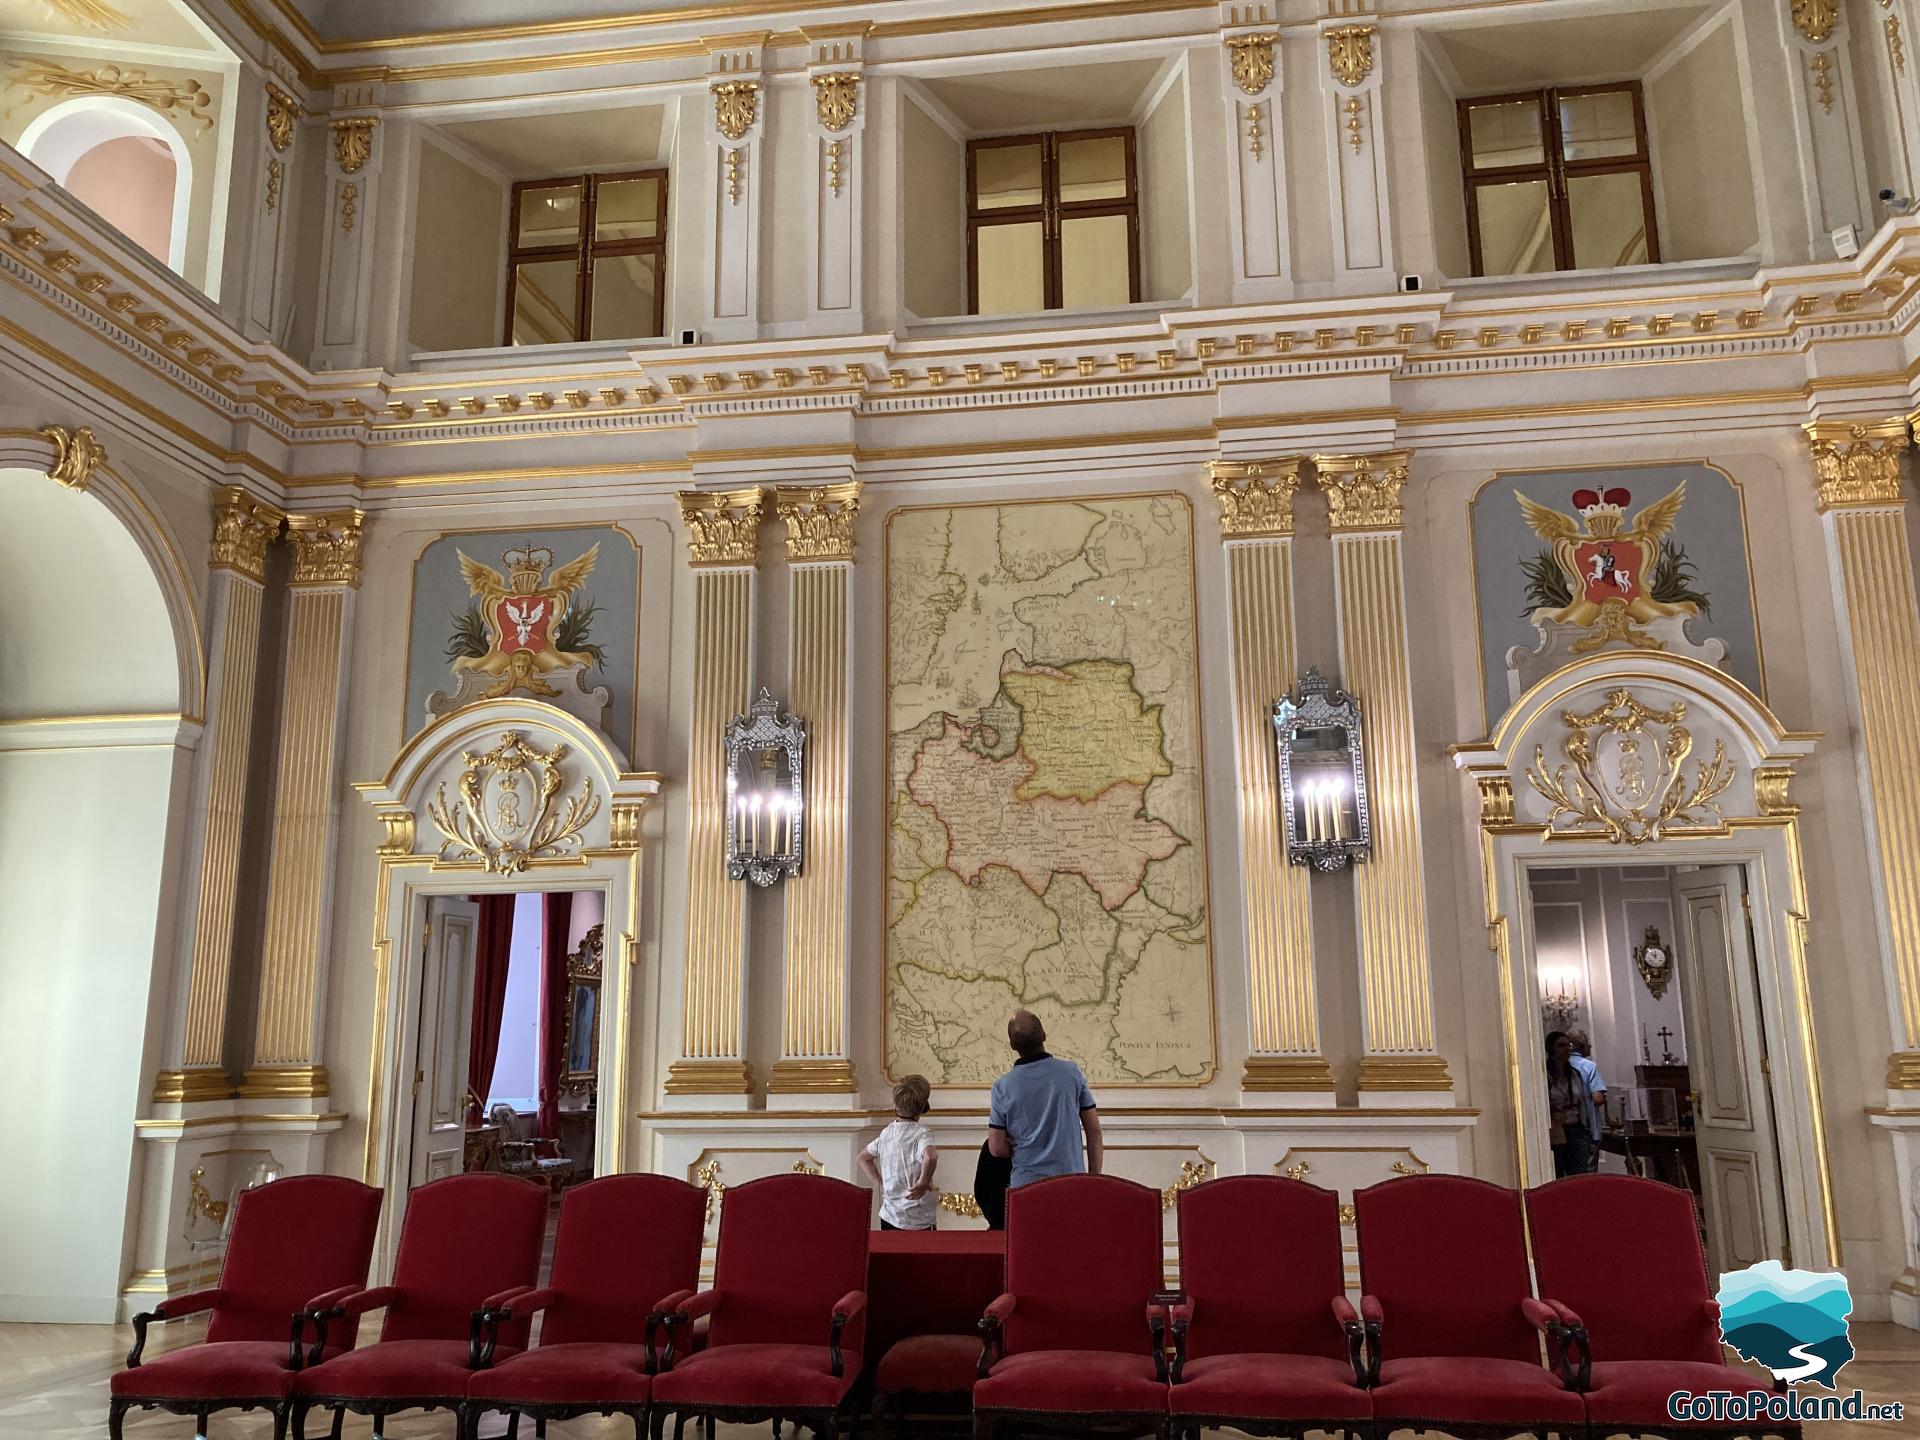 a man and two boys are looking at a map of former Poland with marked borders, on both sides of the map there are entrances to the hall, red chairs are in front,